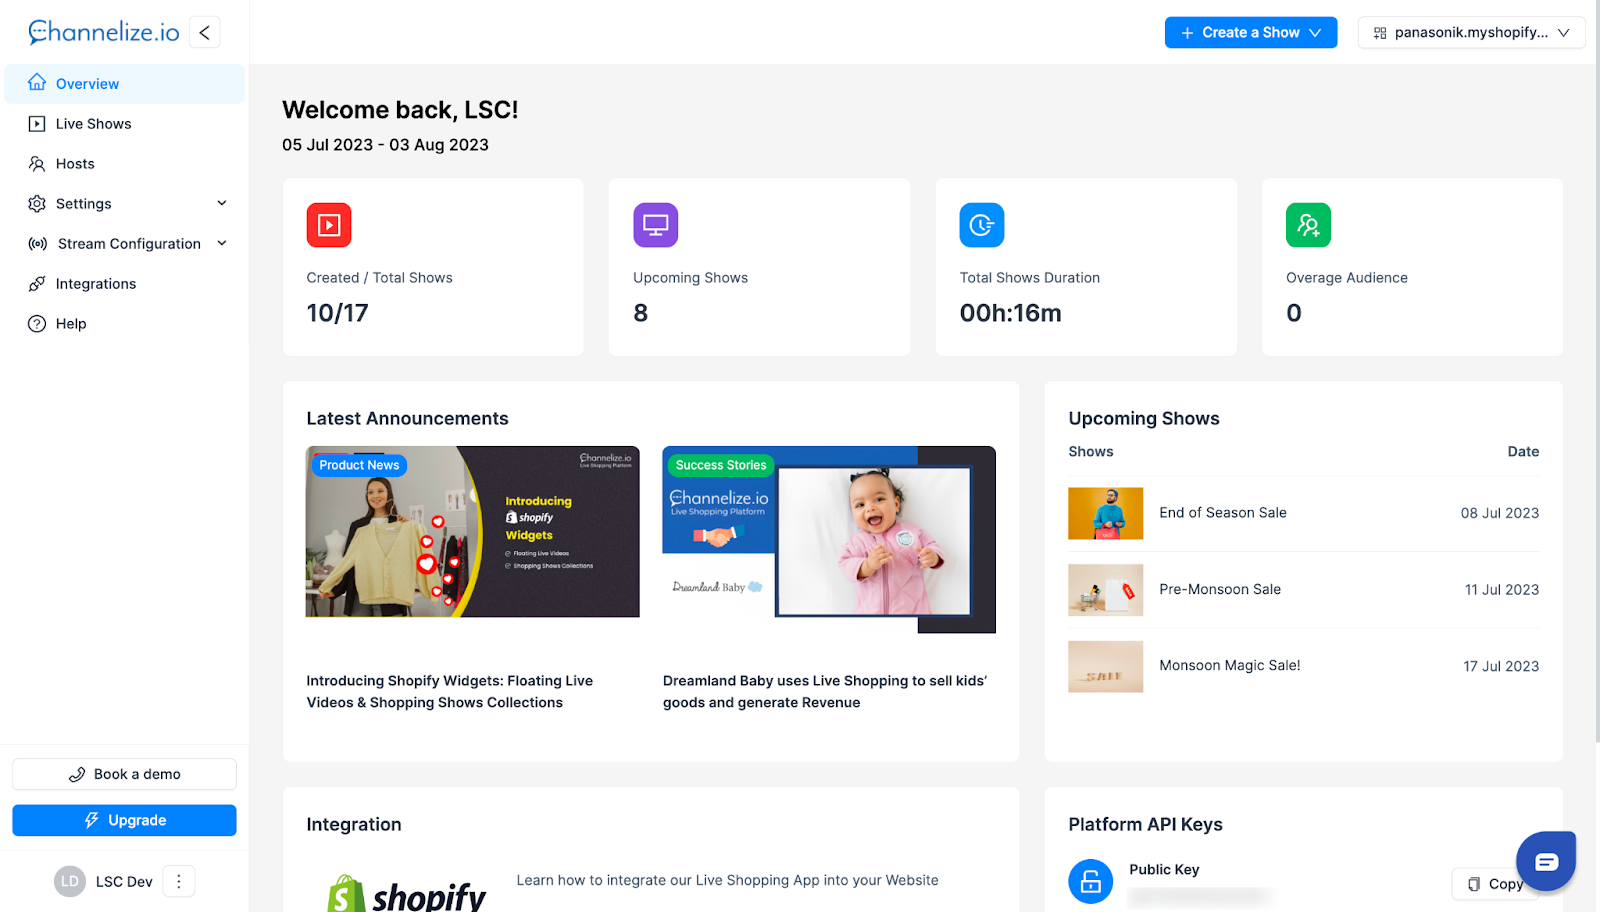 News Hub section of Revamped Dashboard | Channelize.io